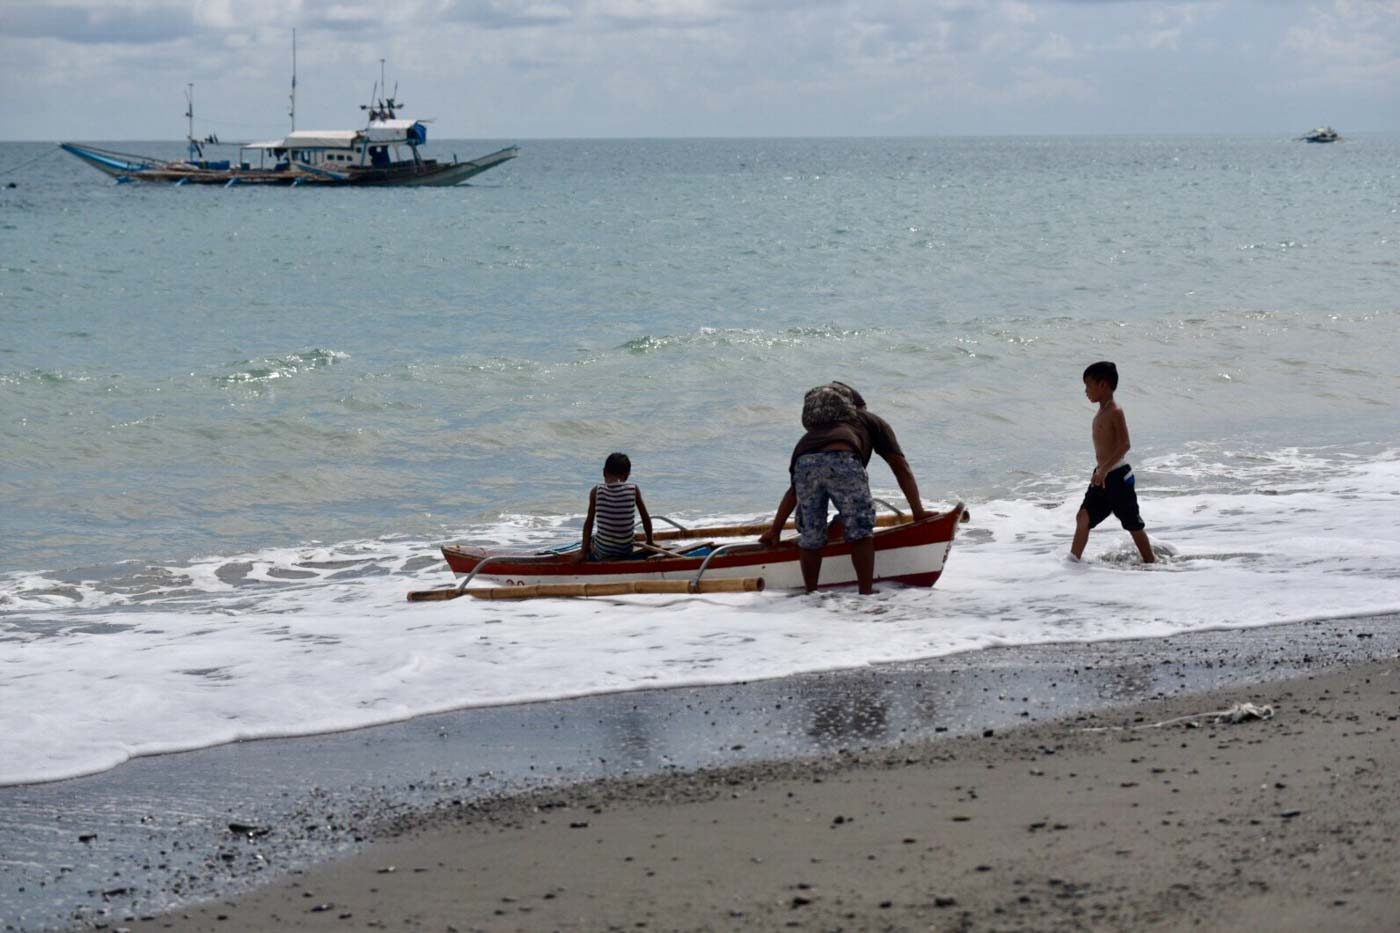 China ship’s assault sparks fear in Occidental Mindoro fishing community